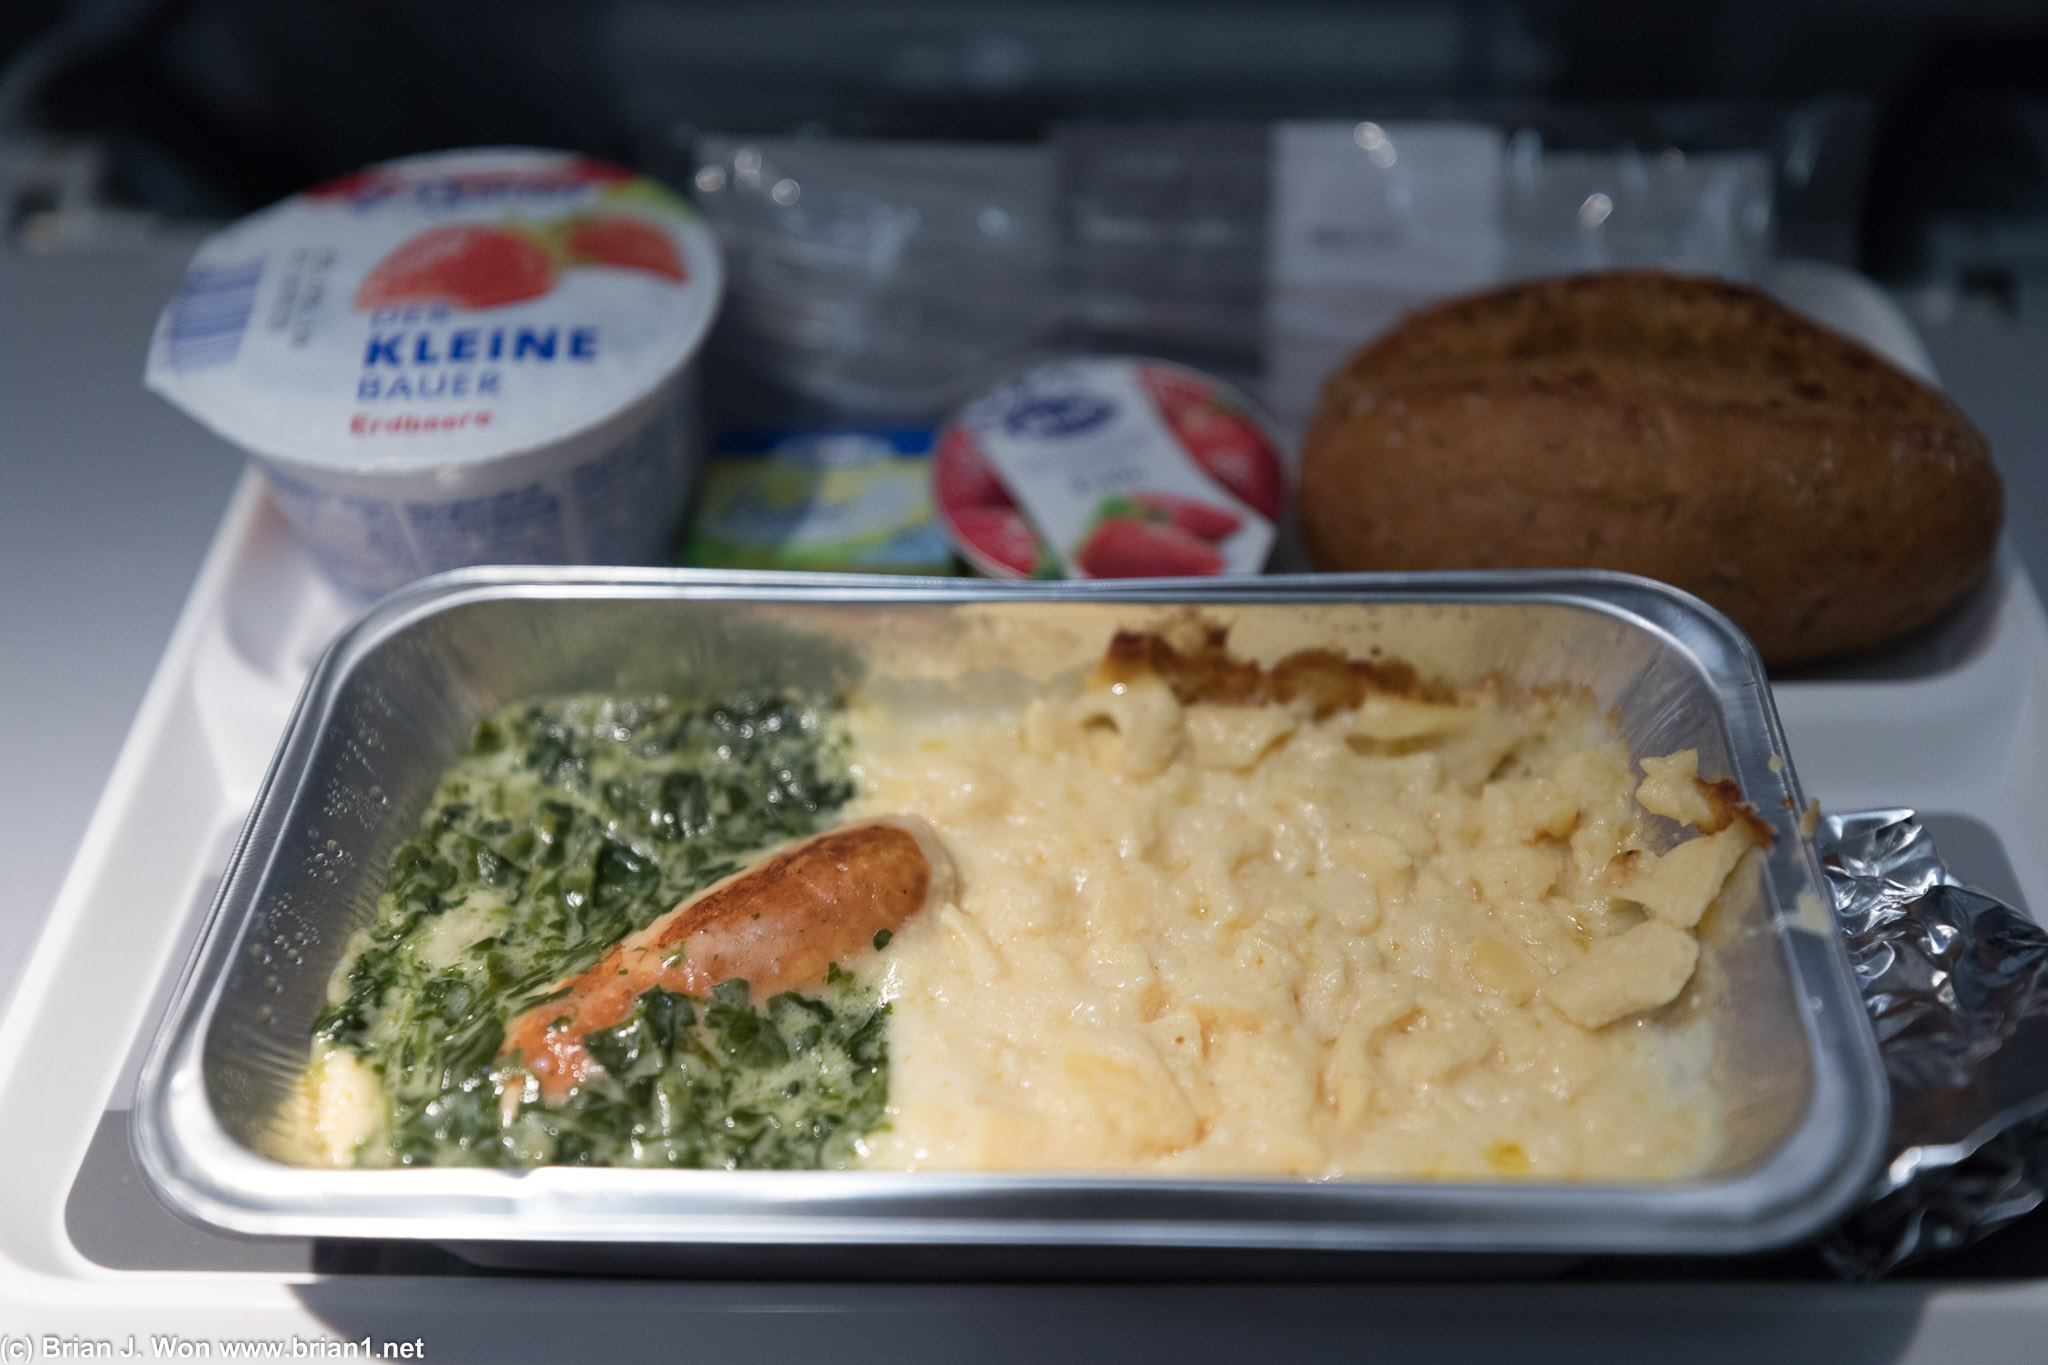 To be fair, breakfast on most flights is gross. This one included.